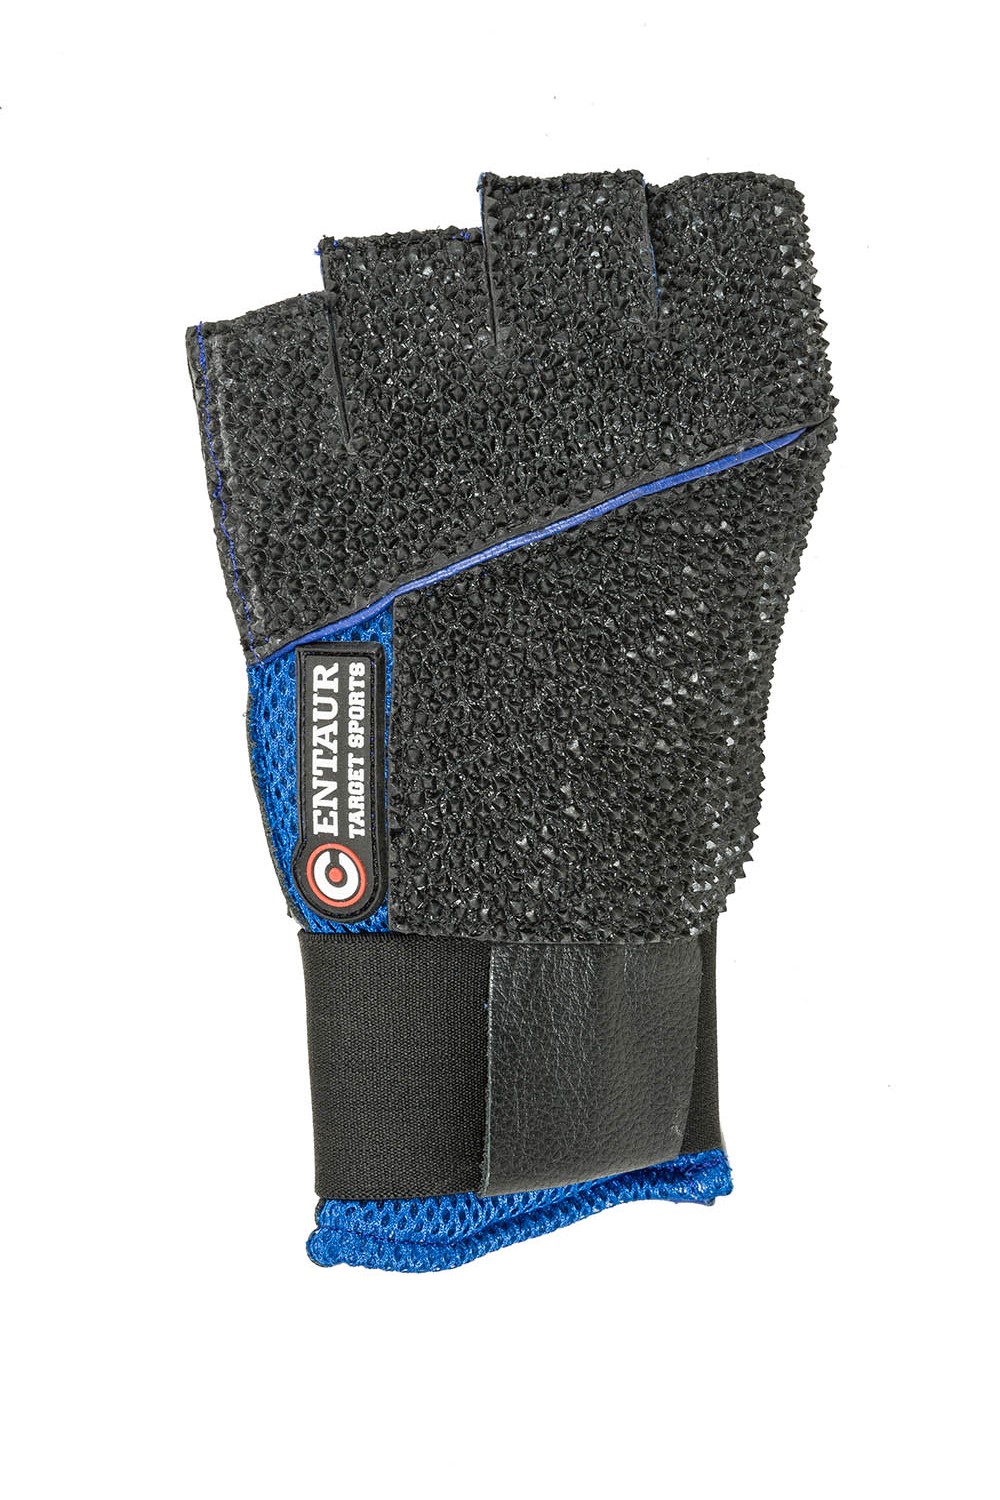 Centaur Match fingerless padded ventilated ISSF compliant target shooting glove - back view - low resolution